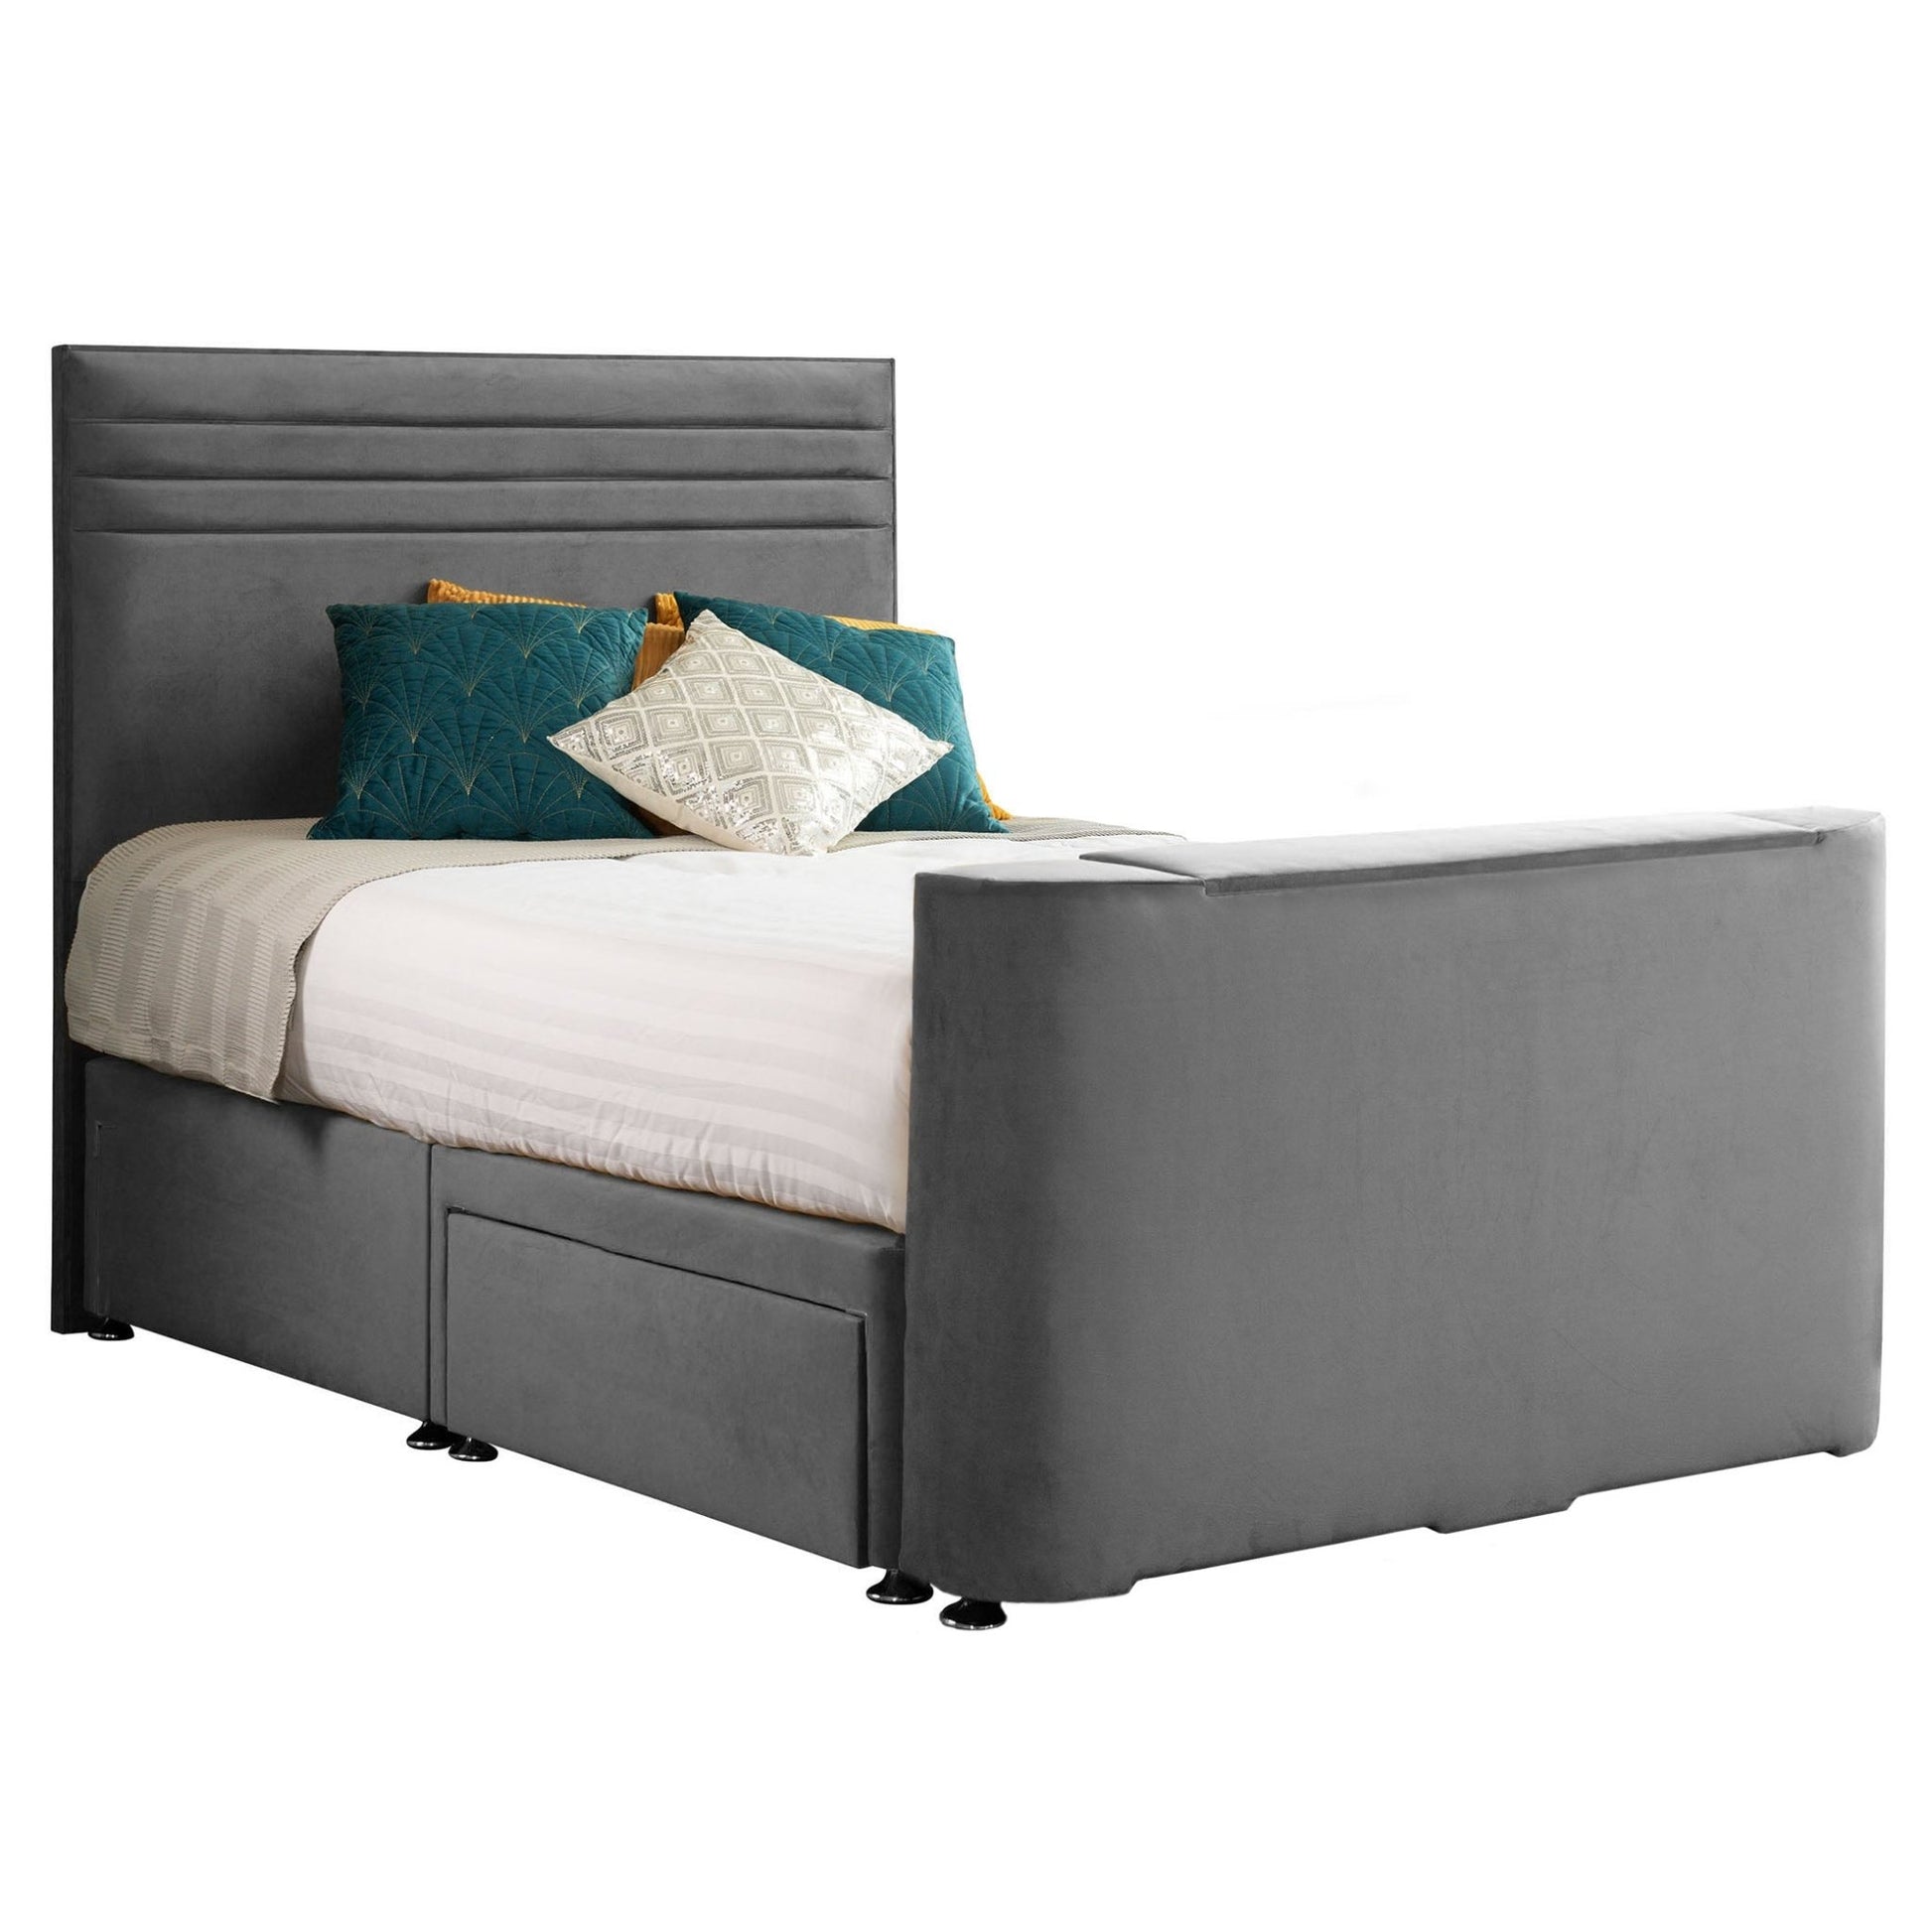 Sweet Dreams Image Chic TV Bed with Storage Options - TV Beds Northwest - INIMA-CHI135PT4DCHATS - choose your colour tvbed - doubletvbed